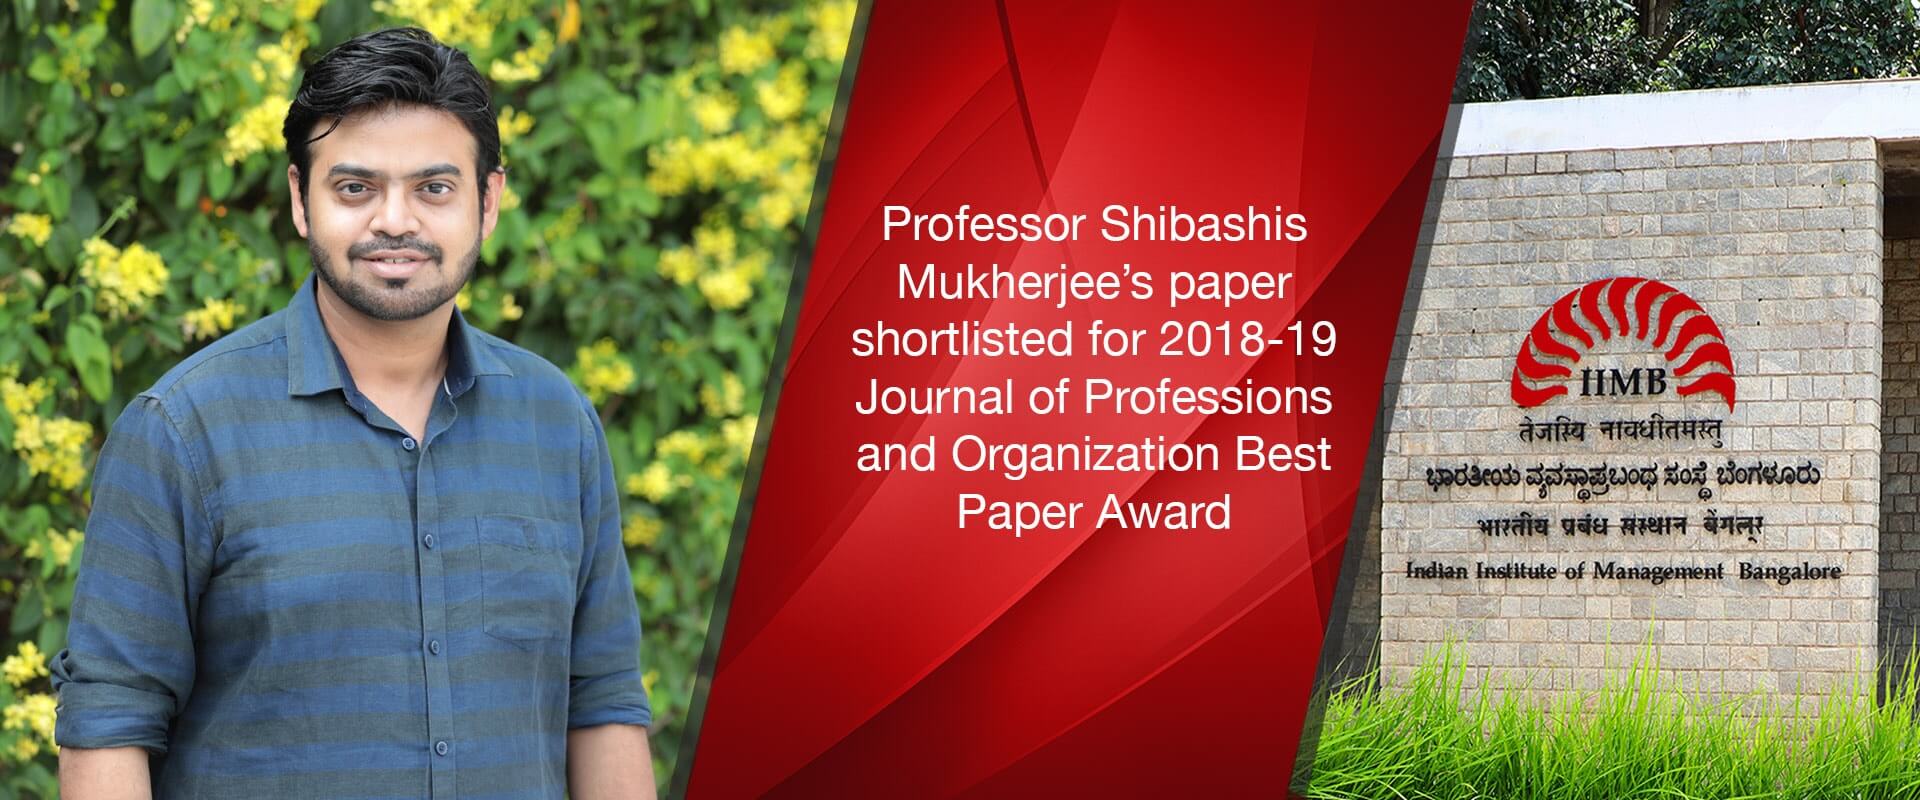 Professor Shibashis Mukherjee’s paper shortlisted for 2018-19 Journal of Professions and Organization Best Paper Award